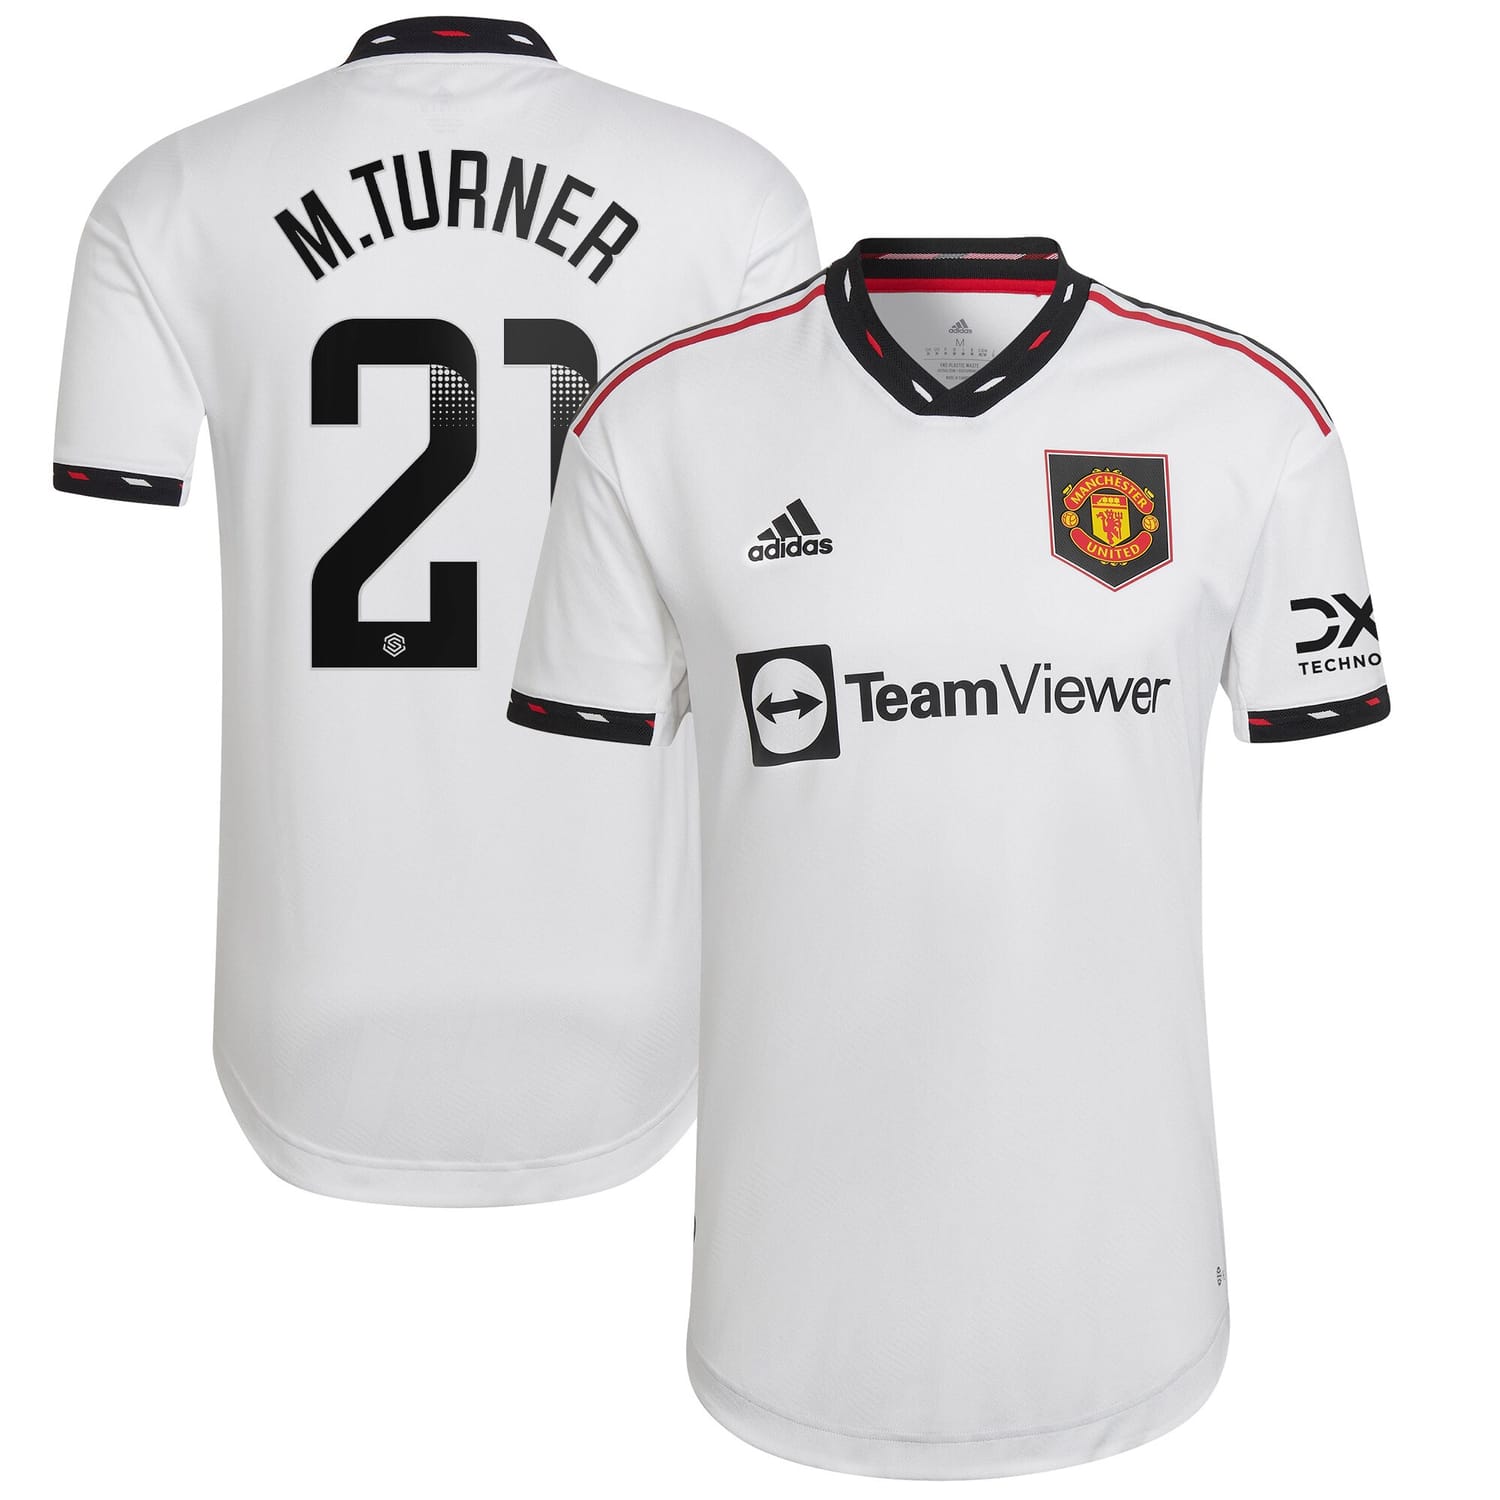 Premier League Manchester United Away WSL Authentic Jersey Shirt 2022-23 player Millie Turner 21 printing for Men